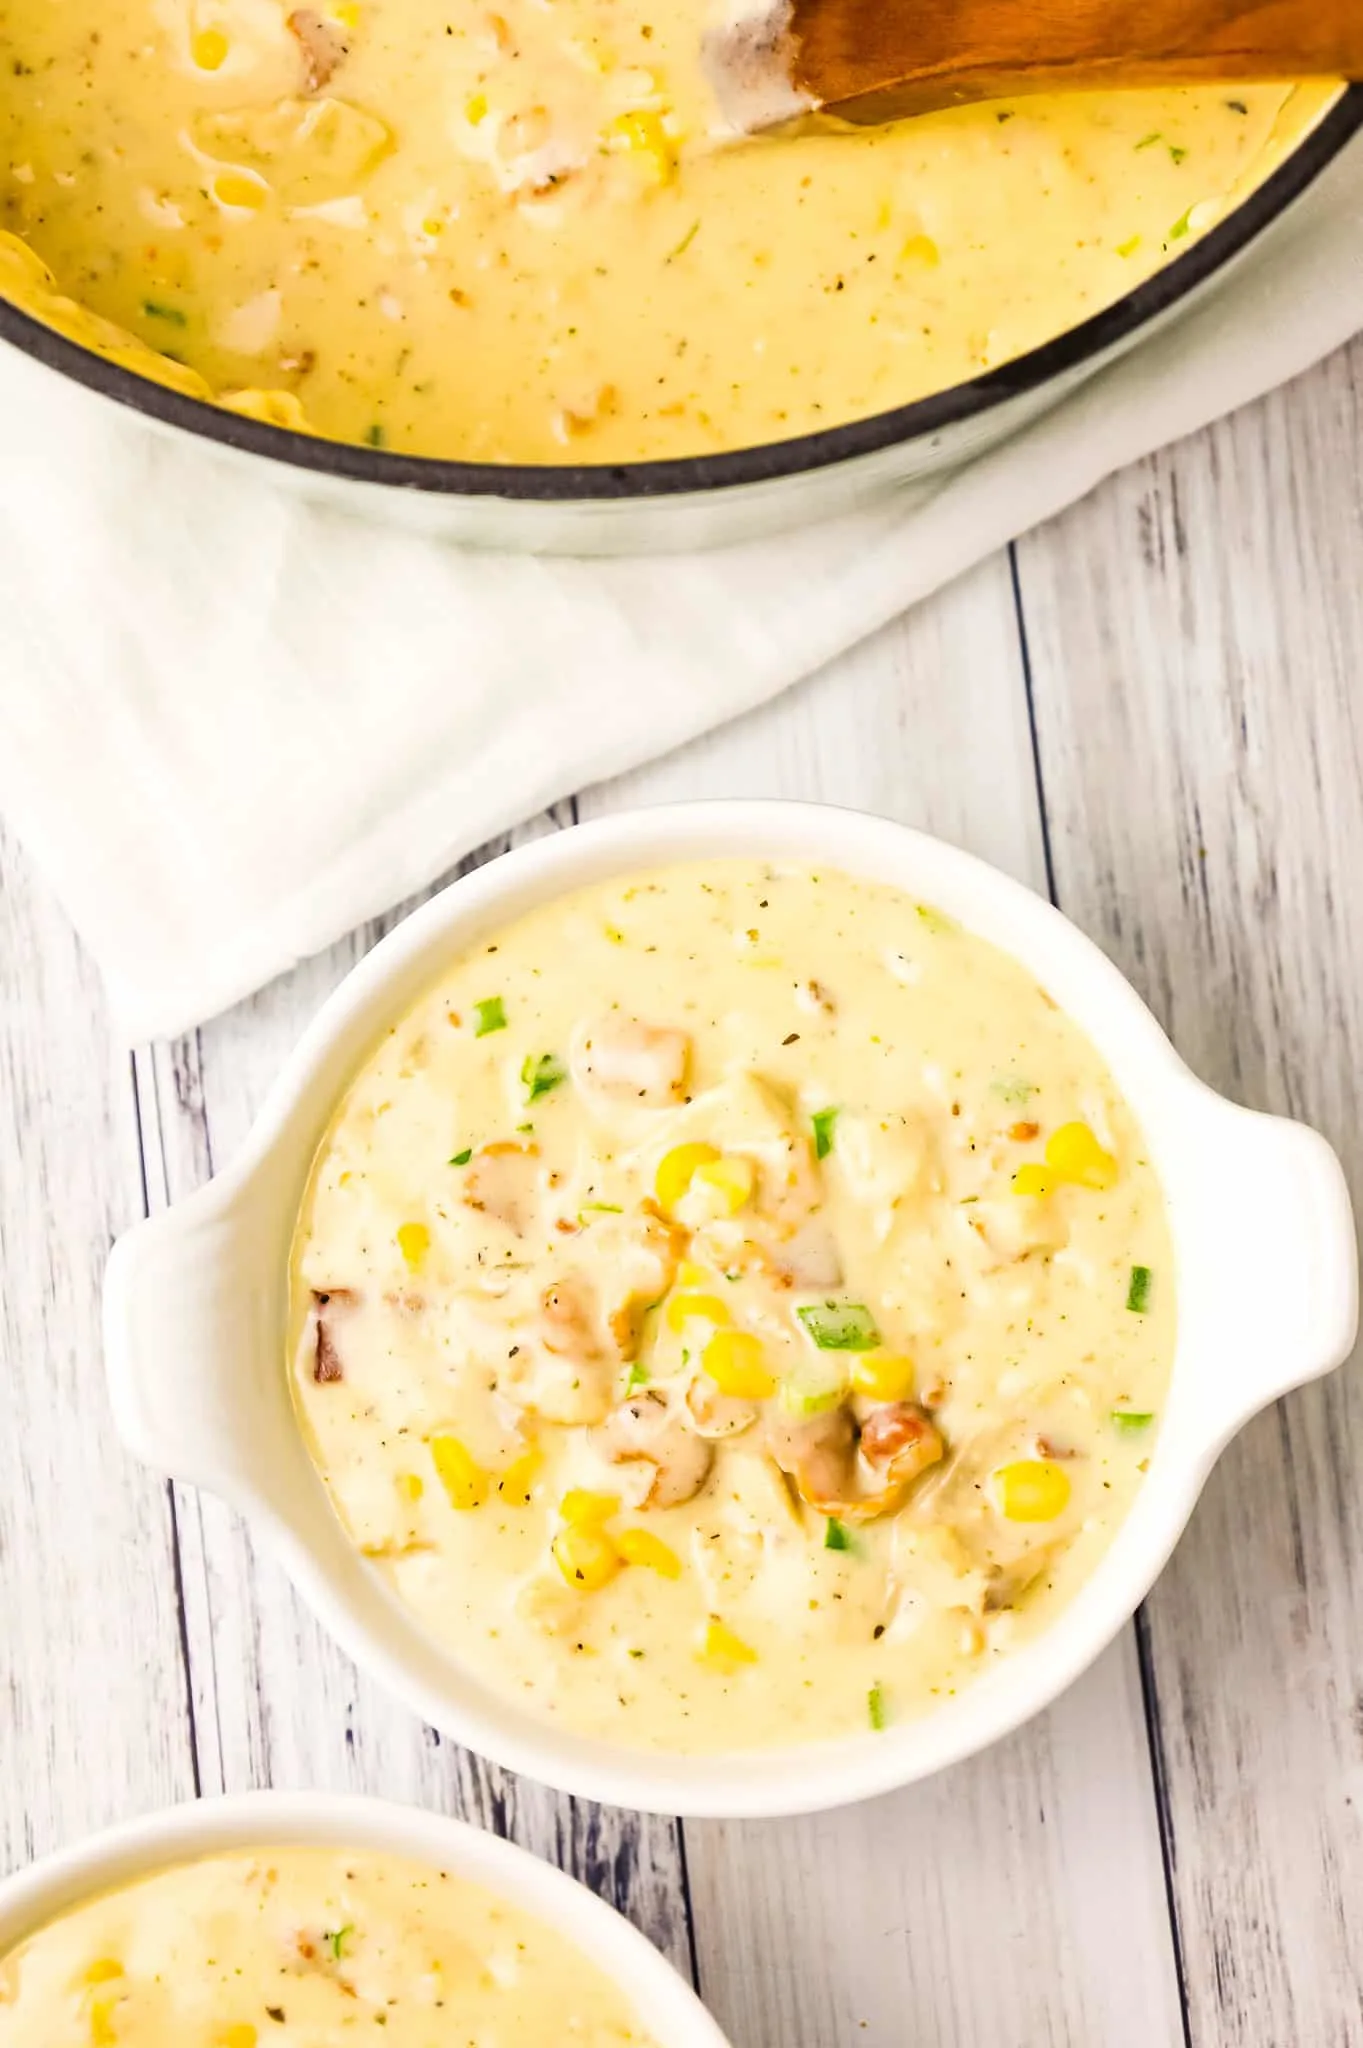 Turkey Corn Chowder with Bacon is a creamy soup recipe loaded with shredded turkey, corn, bacon and chopped green onions.